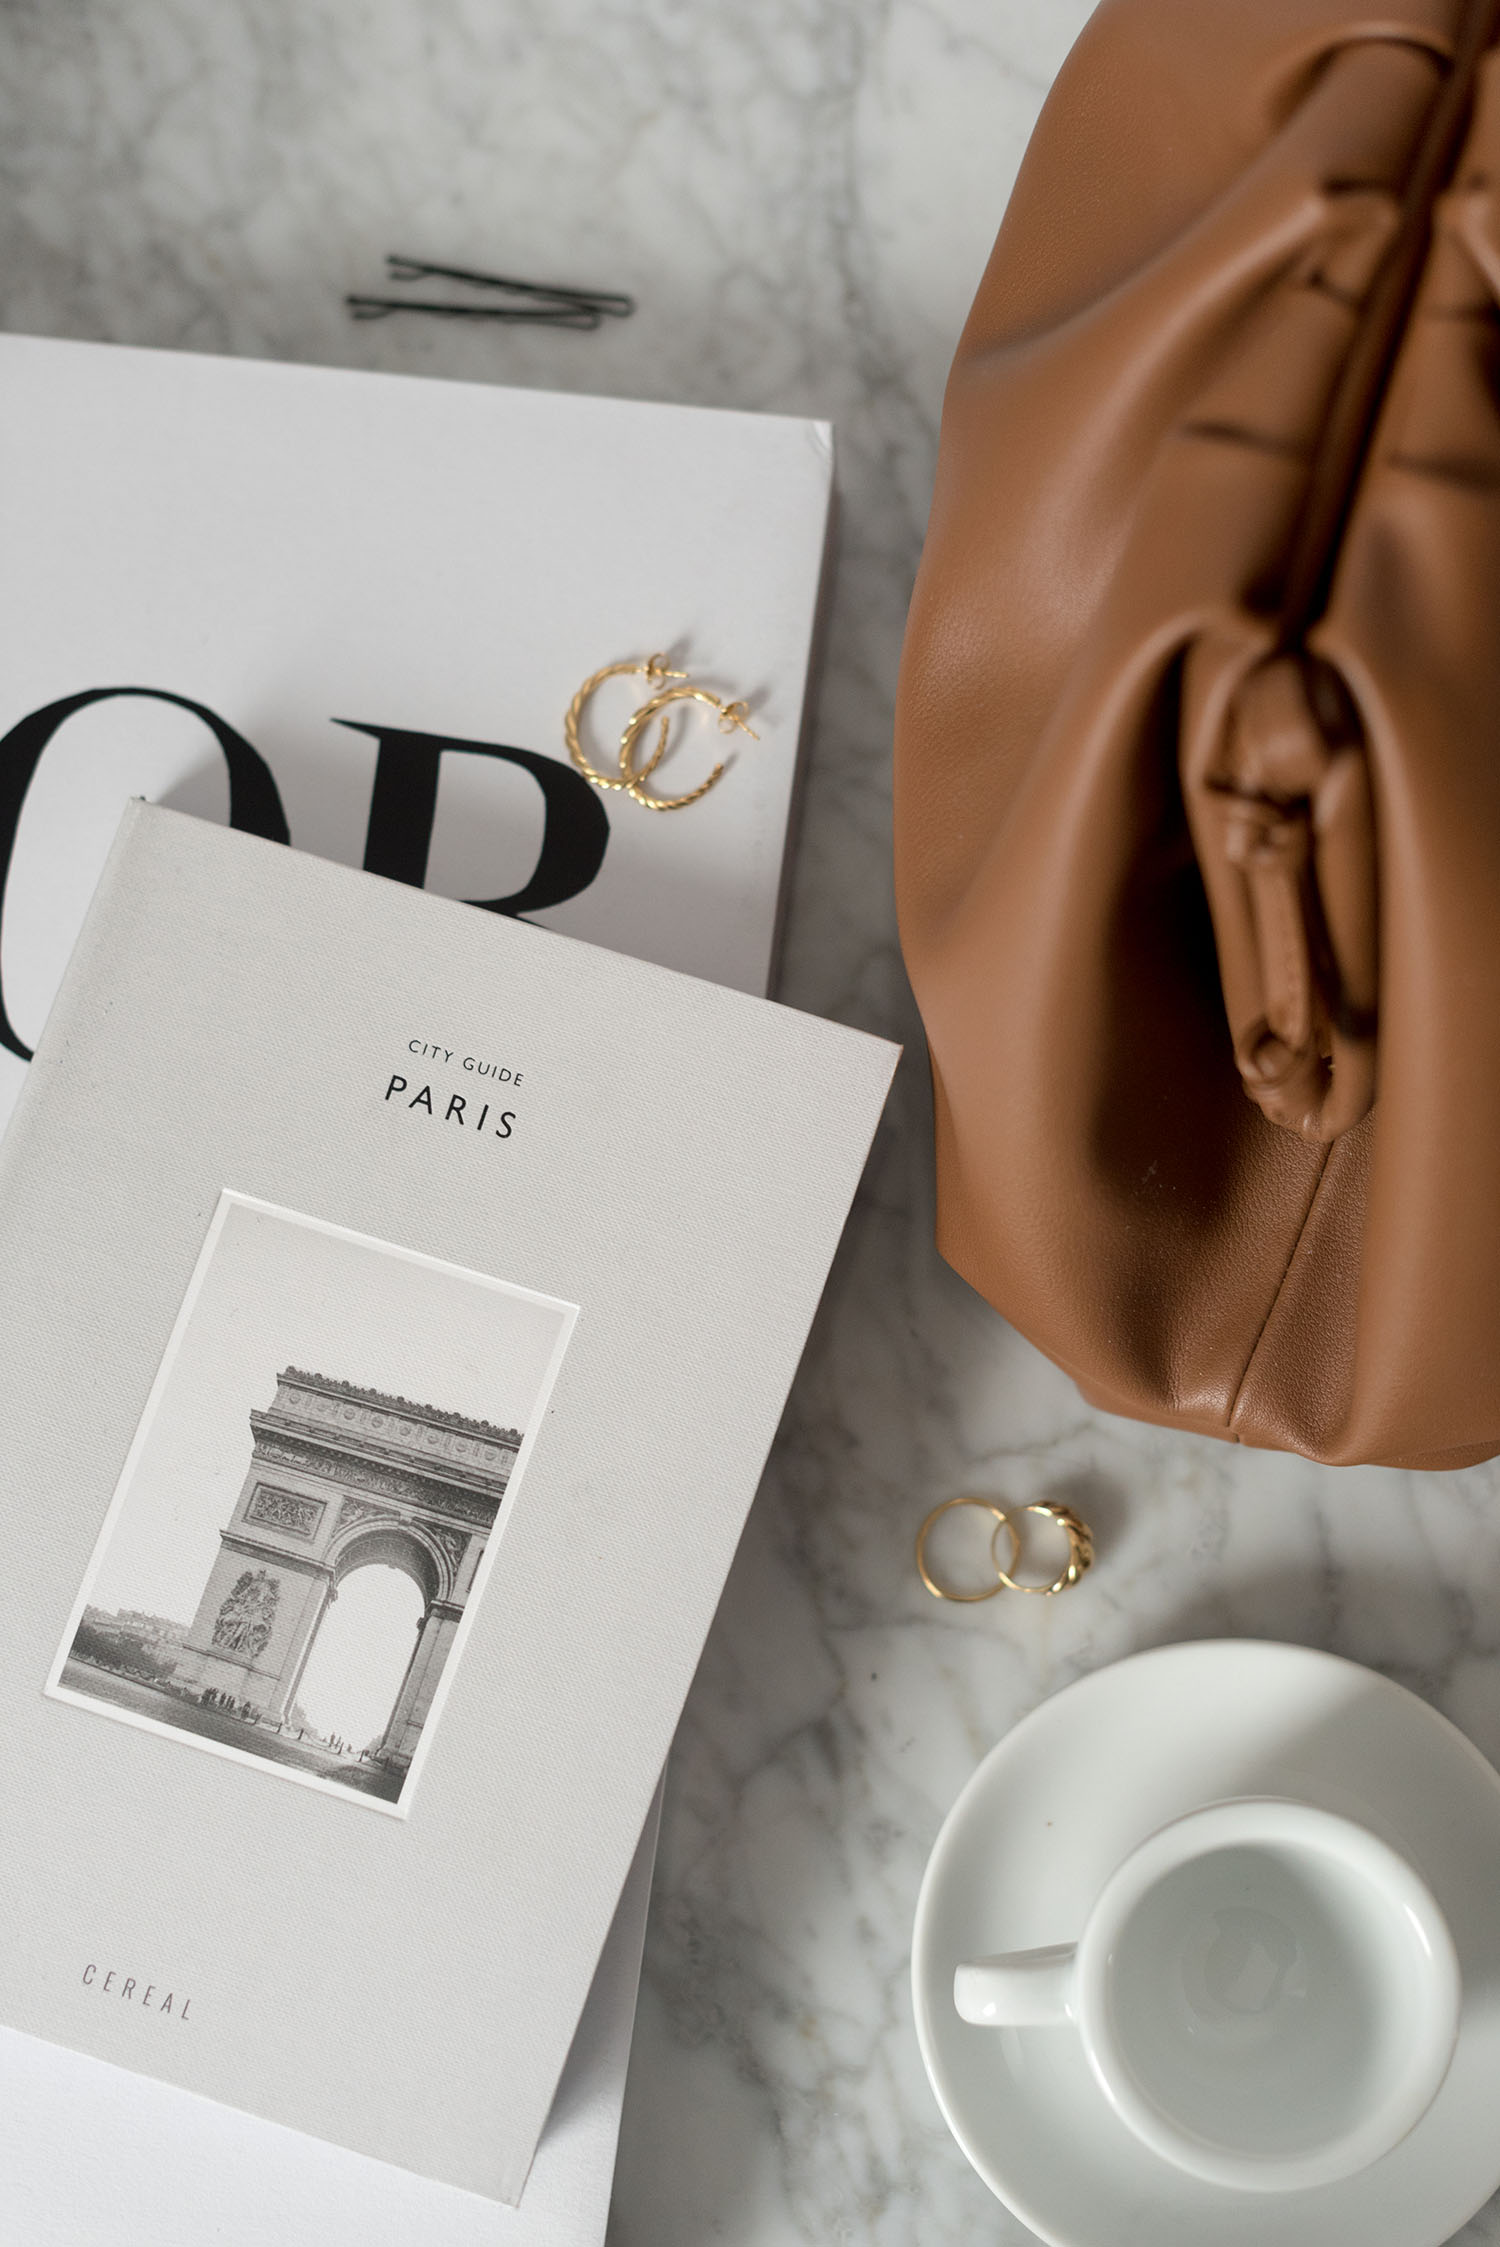 Coco & Vera - Cereal City Guide Paris, Dior by Mats Gustafson, Mejuri croissant hoop earrings